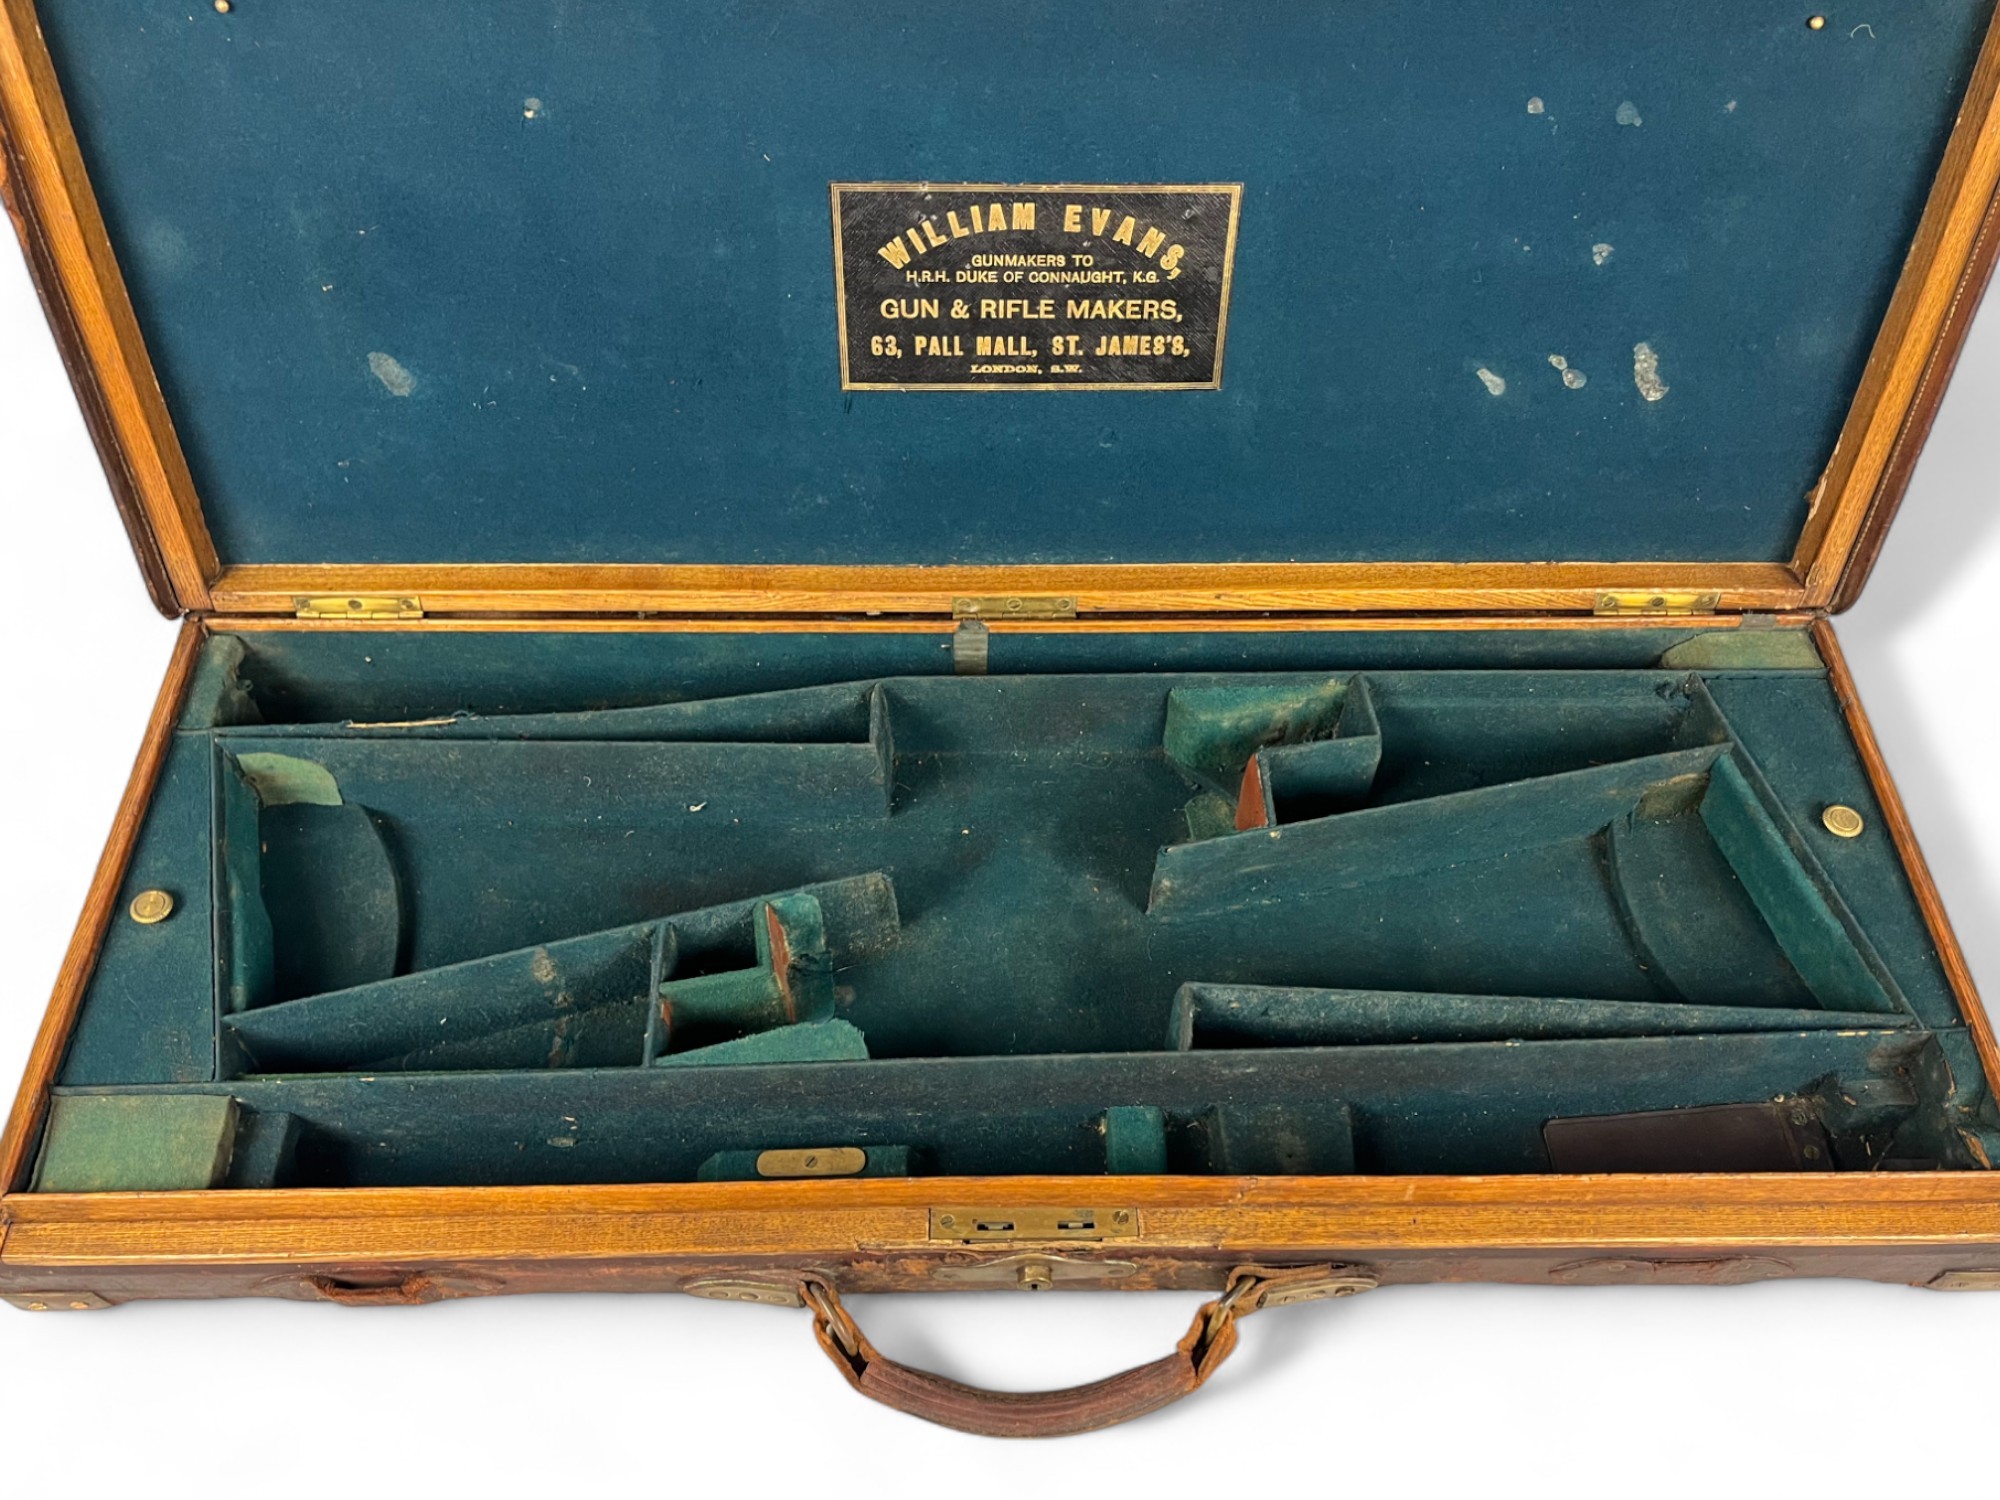 Antique William Evans leather & brass bound gun case. With fitted interior and original label.  85 x - Image 5 of 5